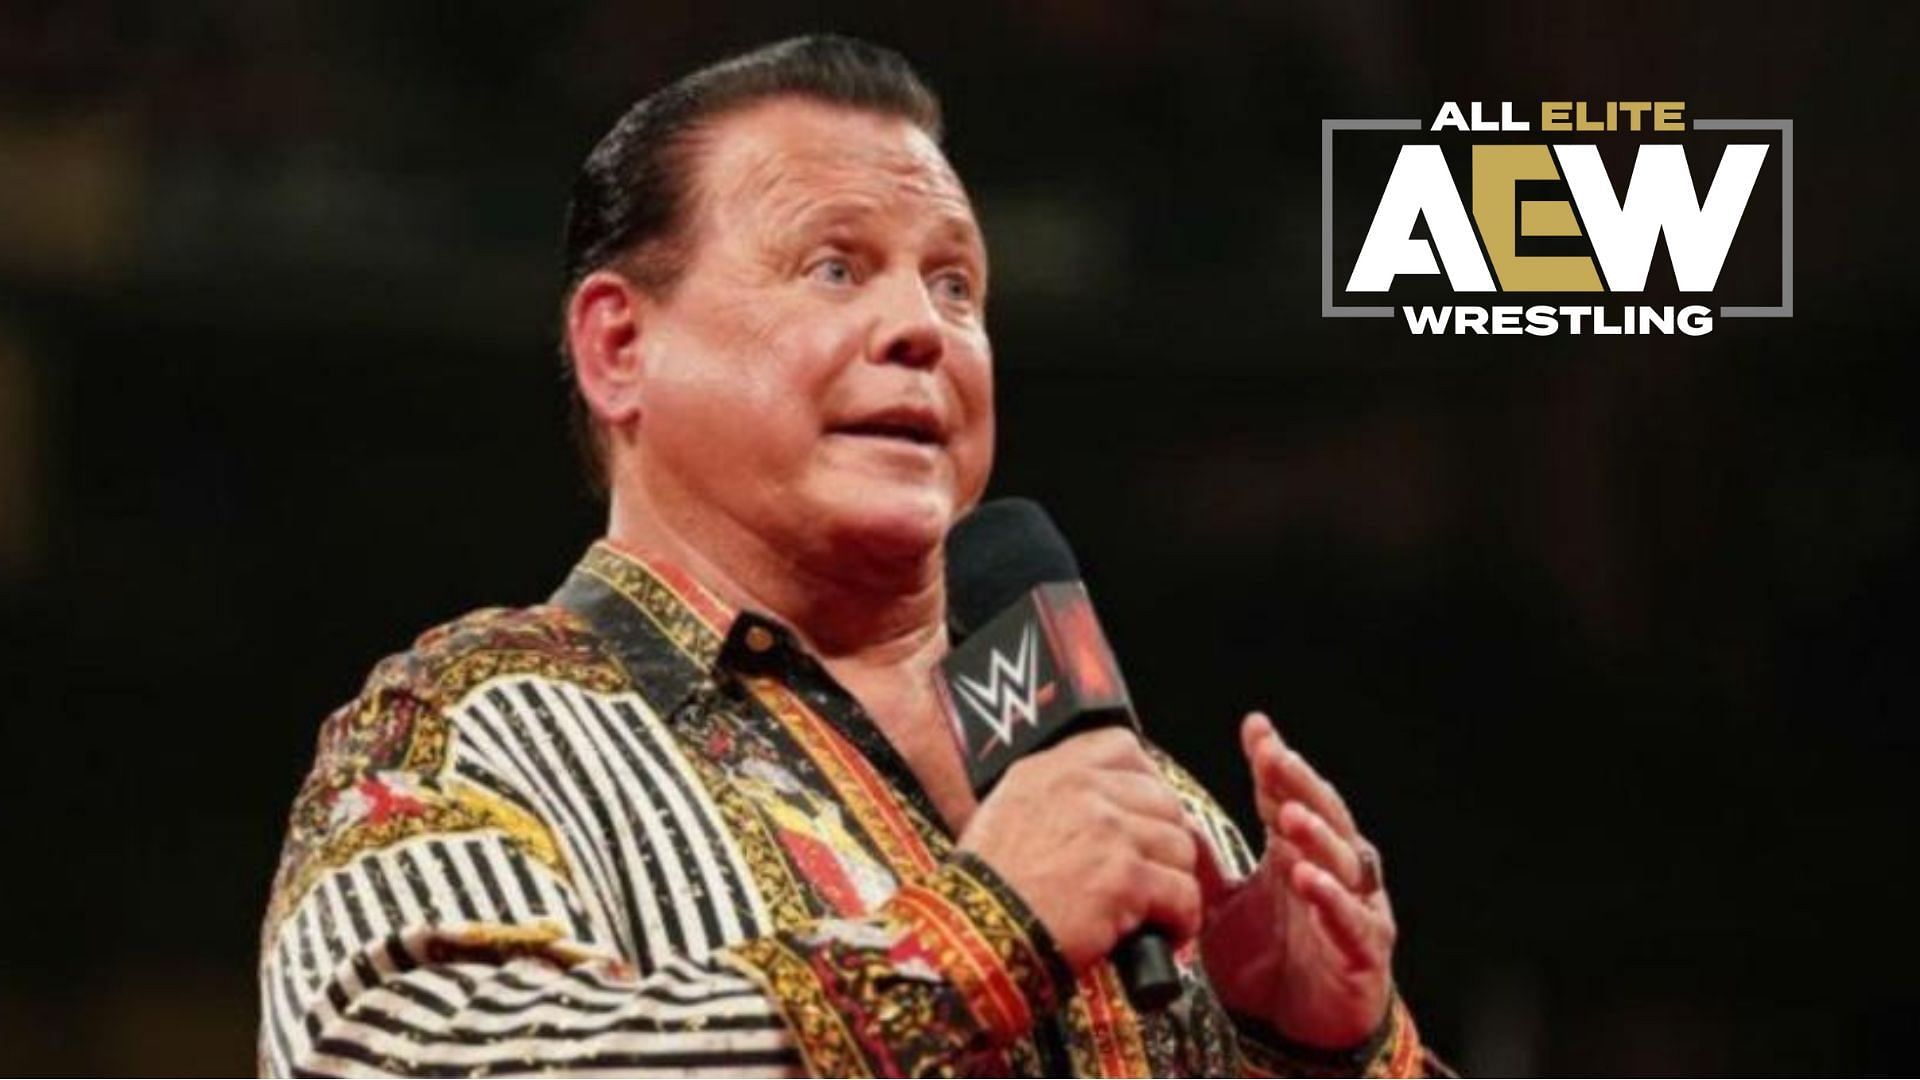 WWE legend Jerry Lawler has suffered from a stroke